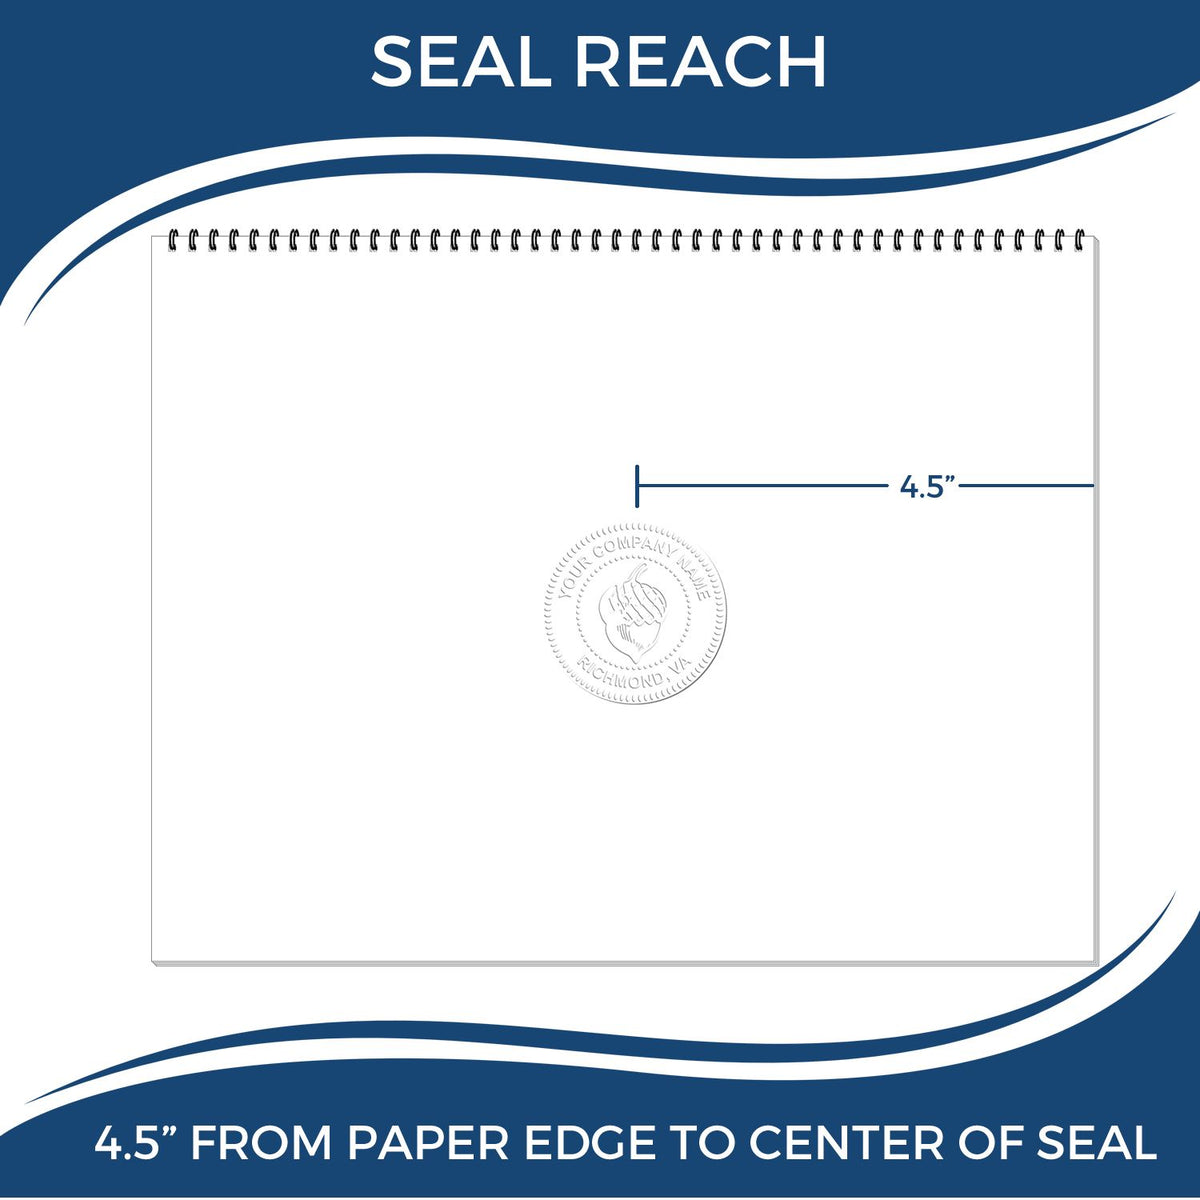 An infographic showing the seal reach which is represented by a ruler and a miniature seal image of the State of Florida Extended Long Reach Geologist Seal